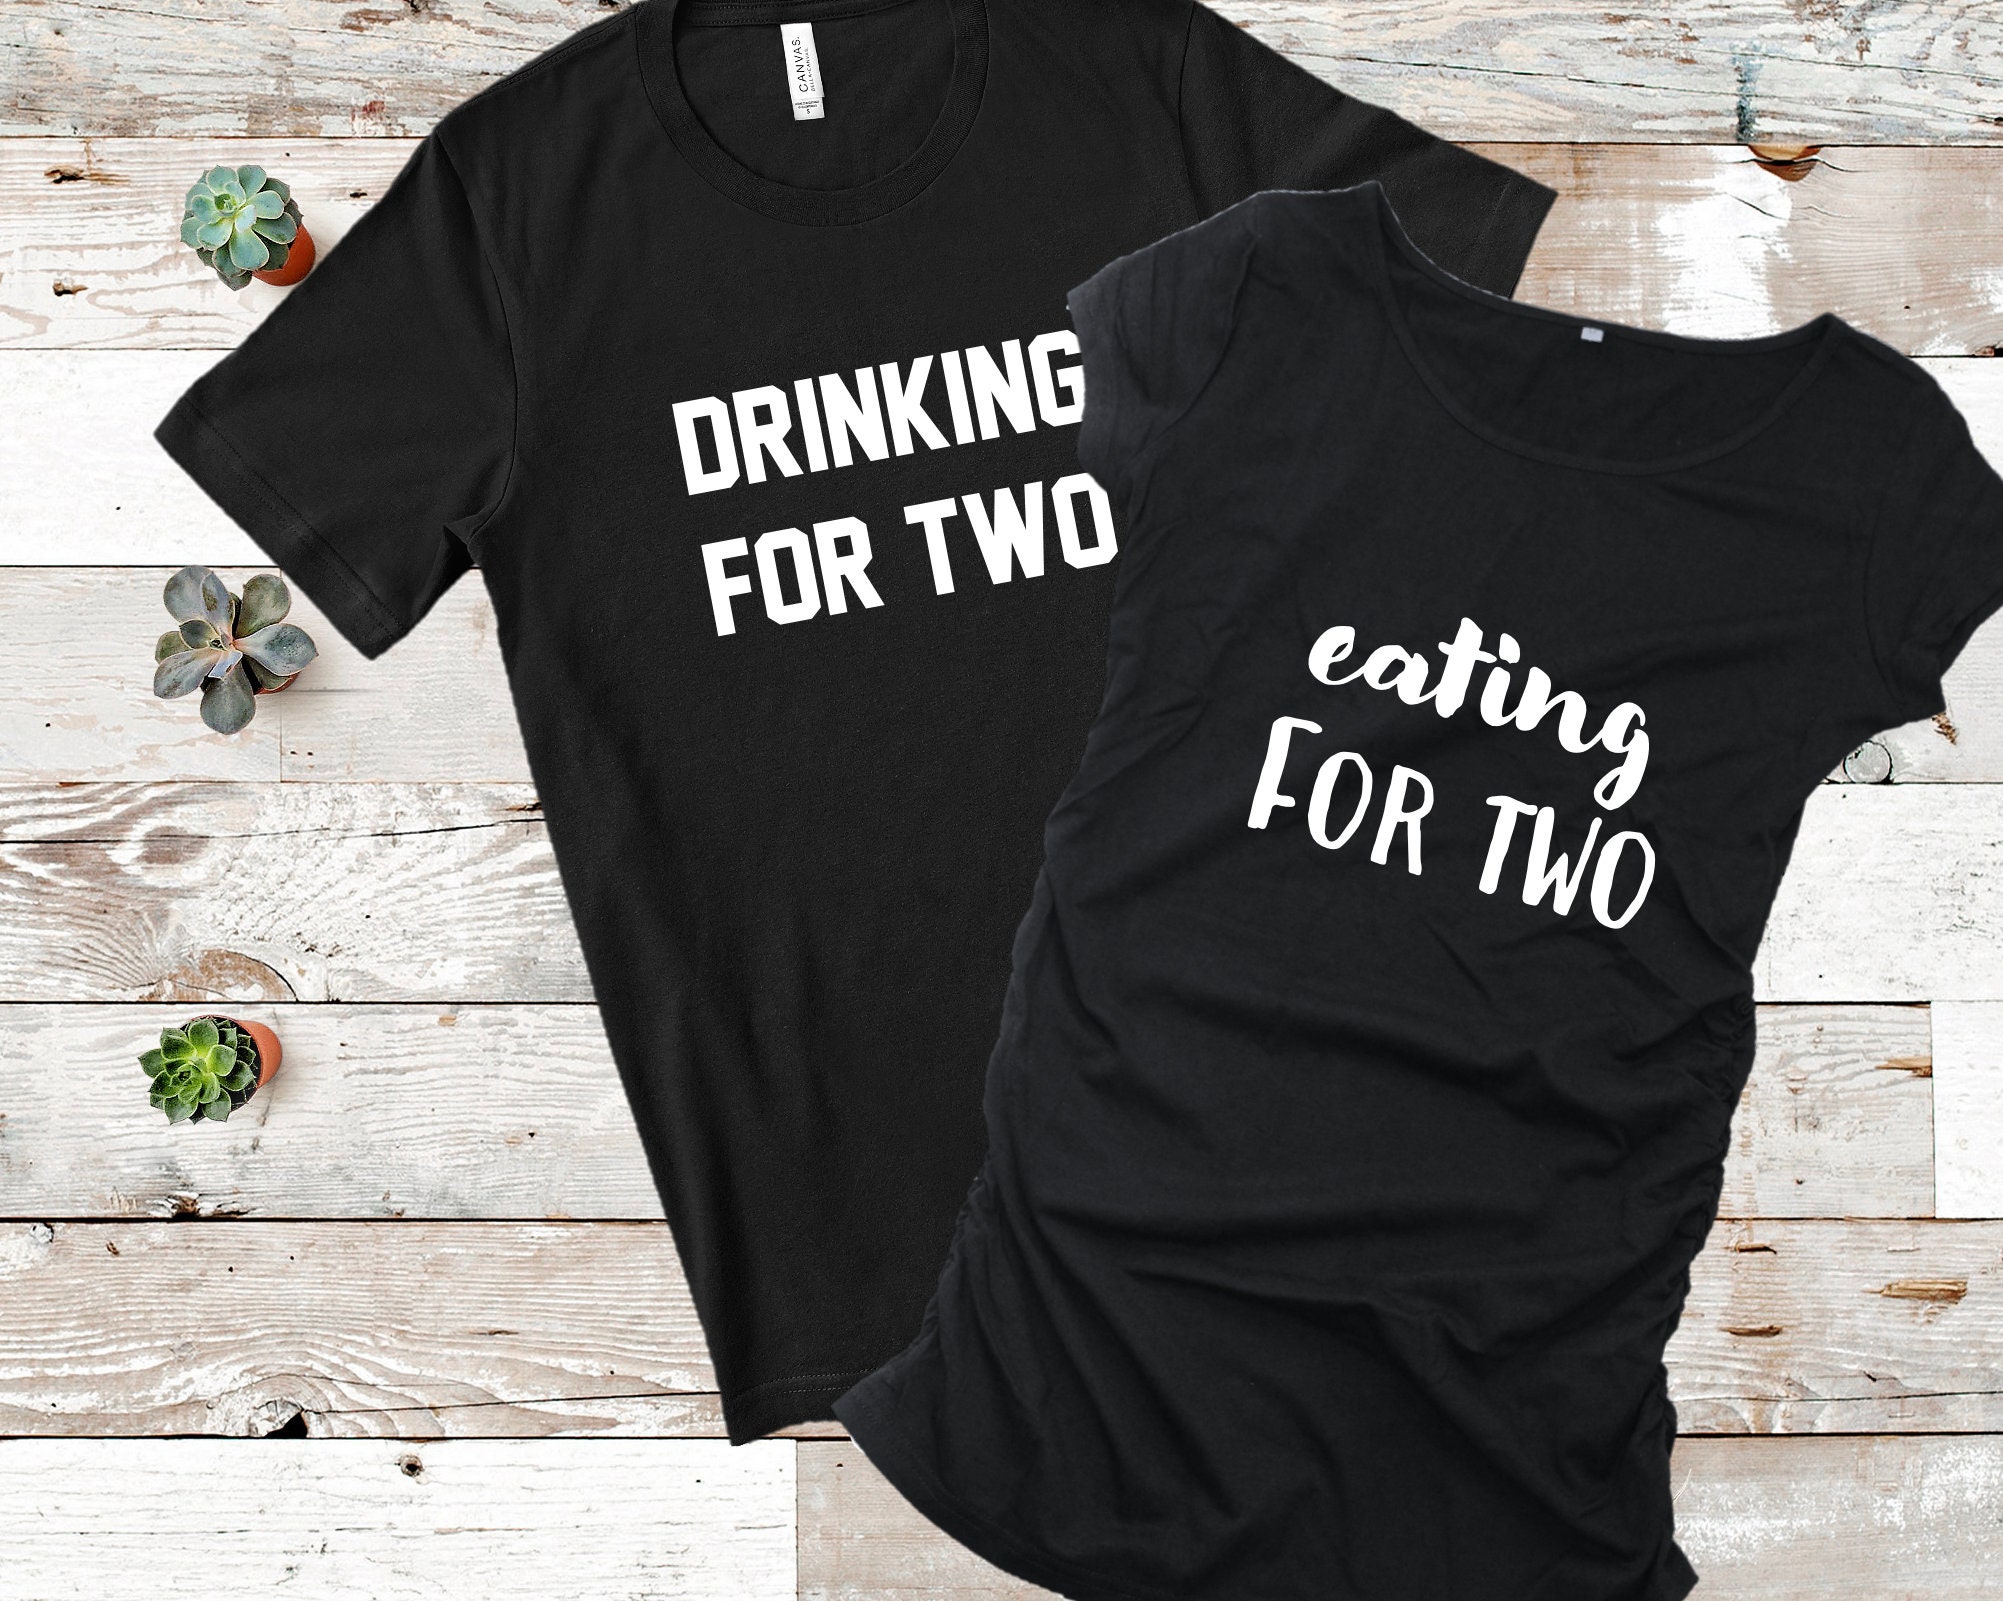 Drinking for two,drinking for two,eating for two,drinking for three,pregnancy,announcement,pregnancy shirt,pregnancy reveal,pregnant,dad